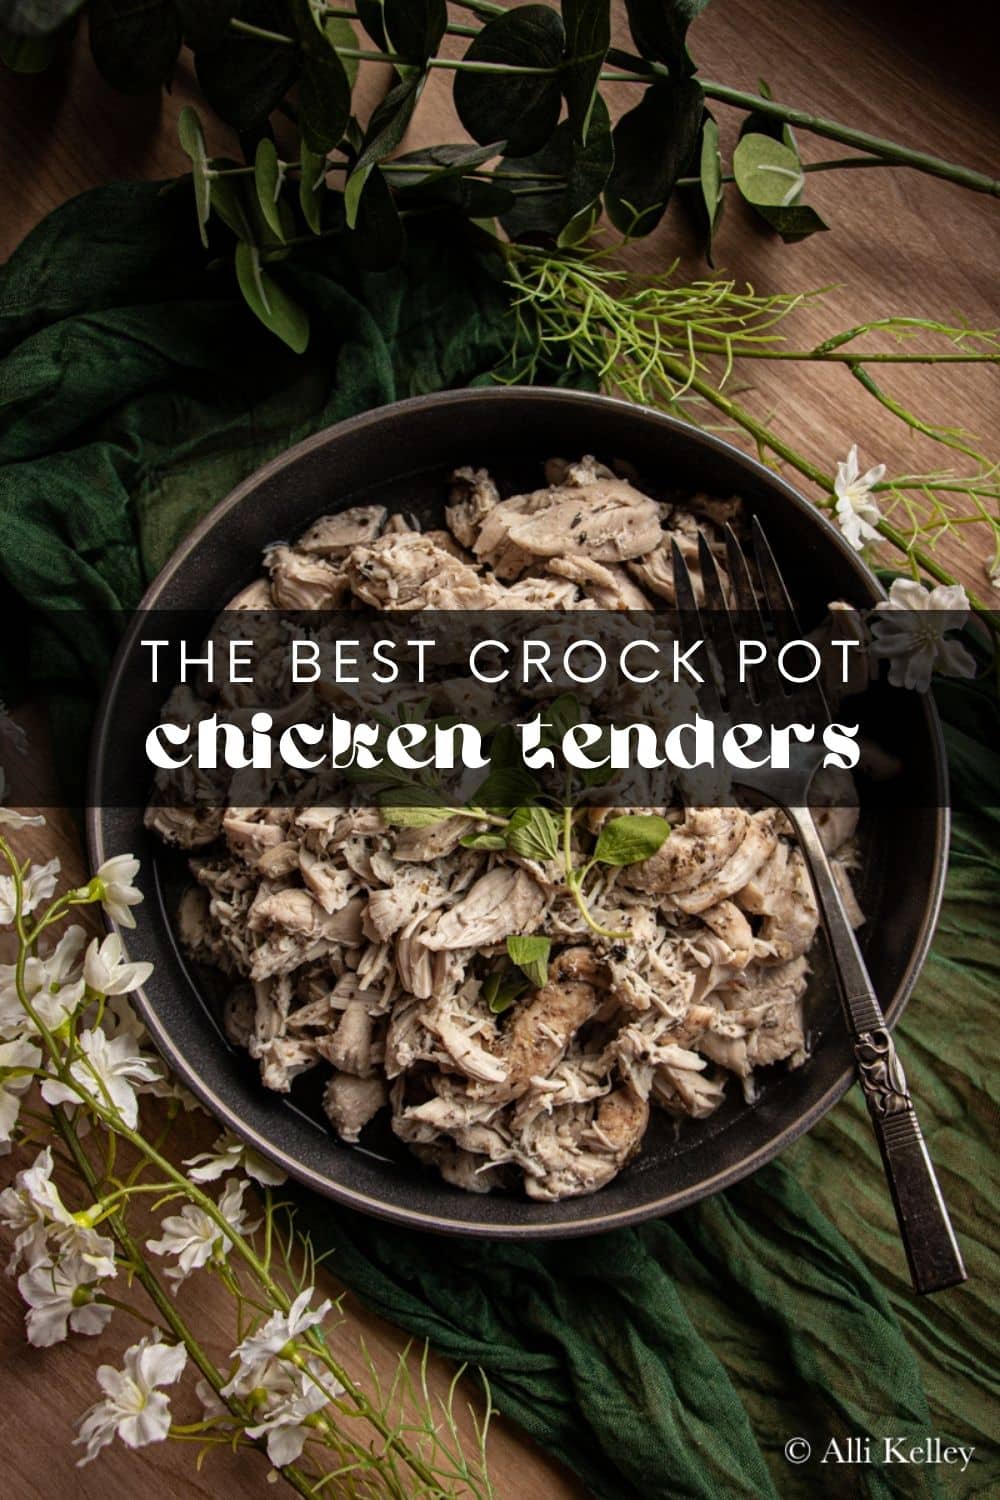 Making chicken tenders in the crock pot is the easiest way to create delicious meals for your family! There’s just something about this slow-cooked juicy chicken that everyone loves. But if you’re wondering how long to cook chicken tenders in crock pot, then you’ve come to the right place!